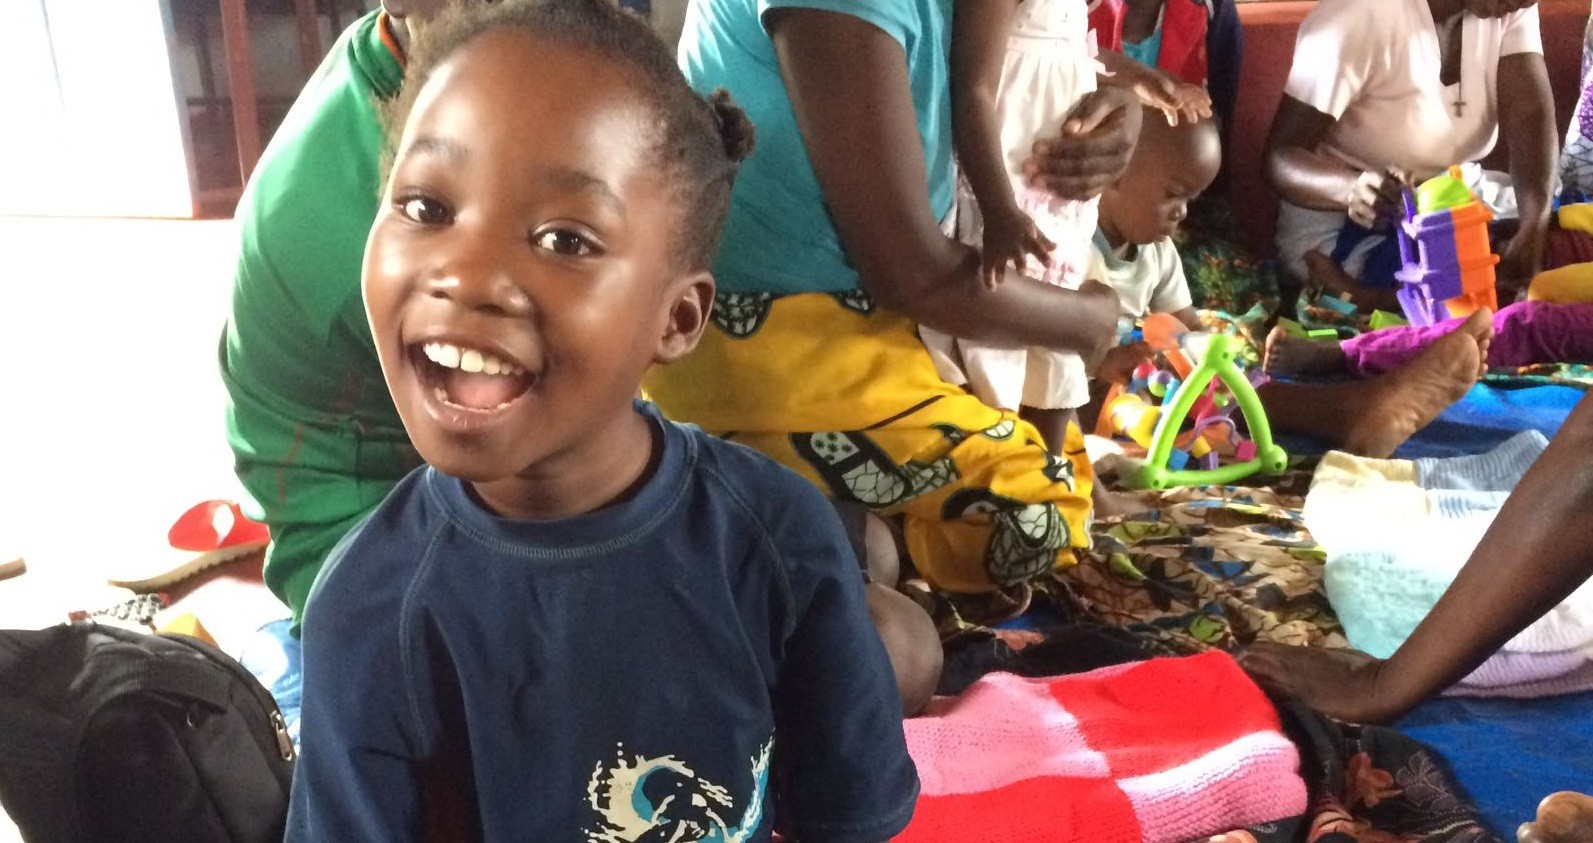 a young girl from zambia with cerebral palsy